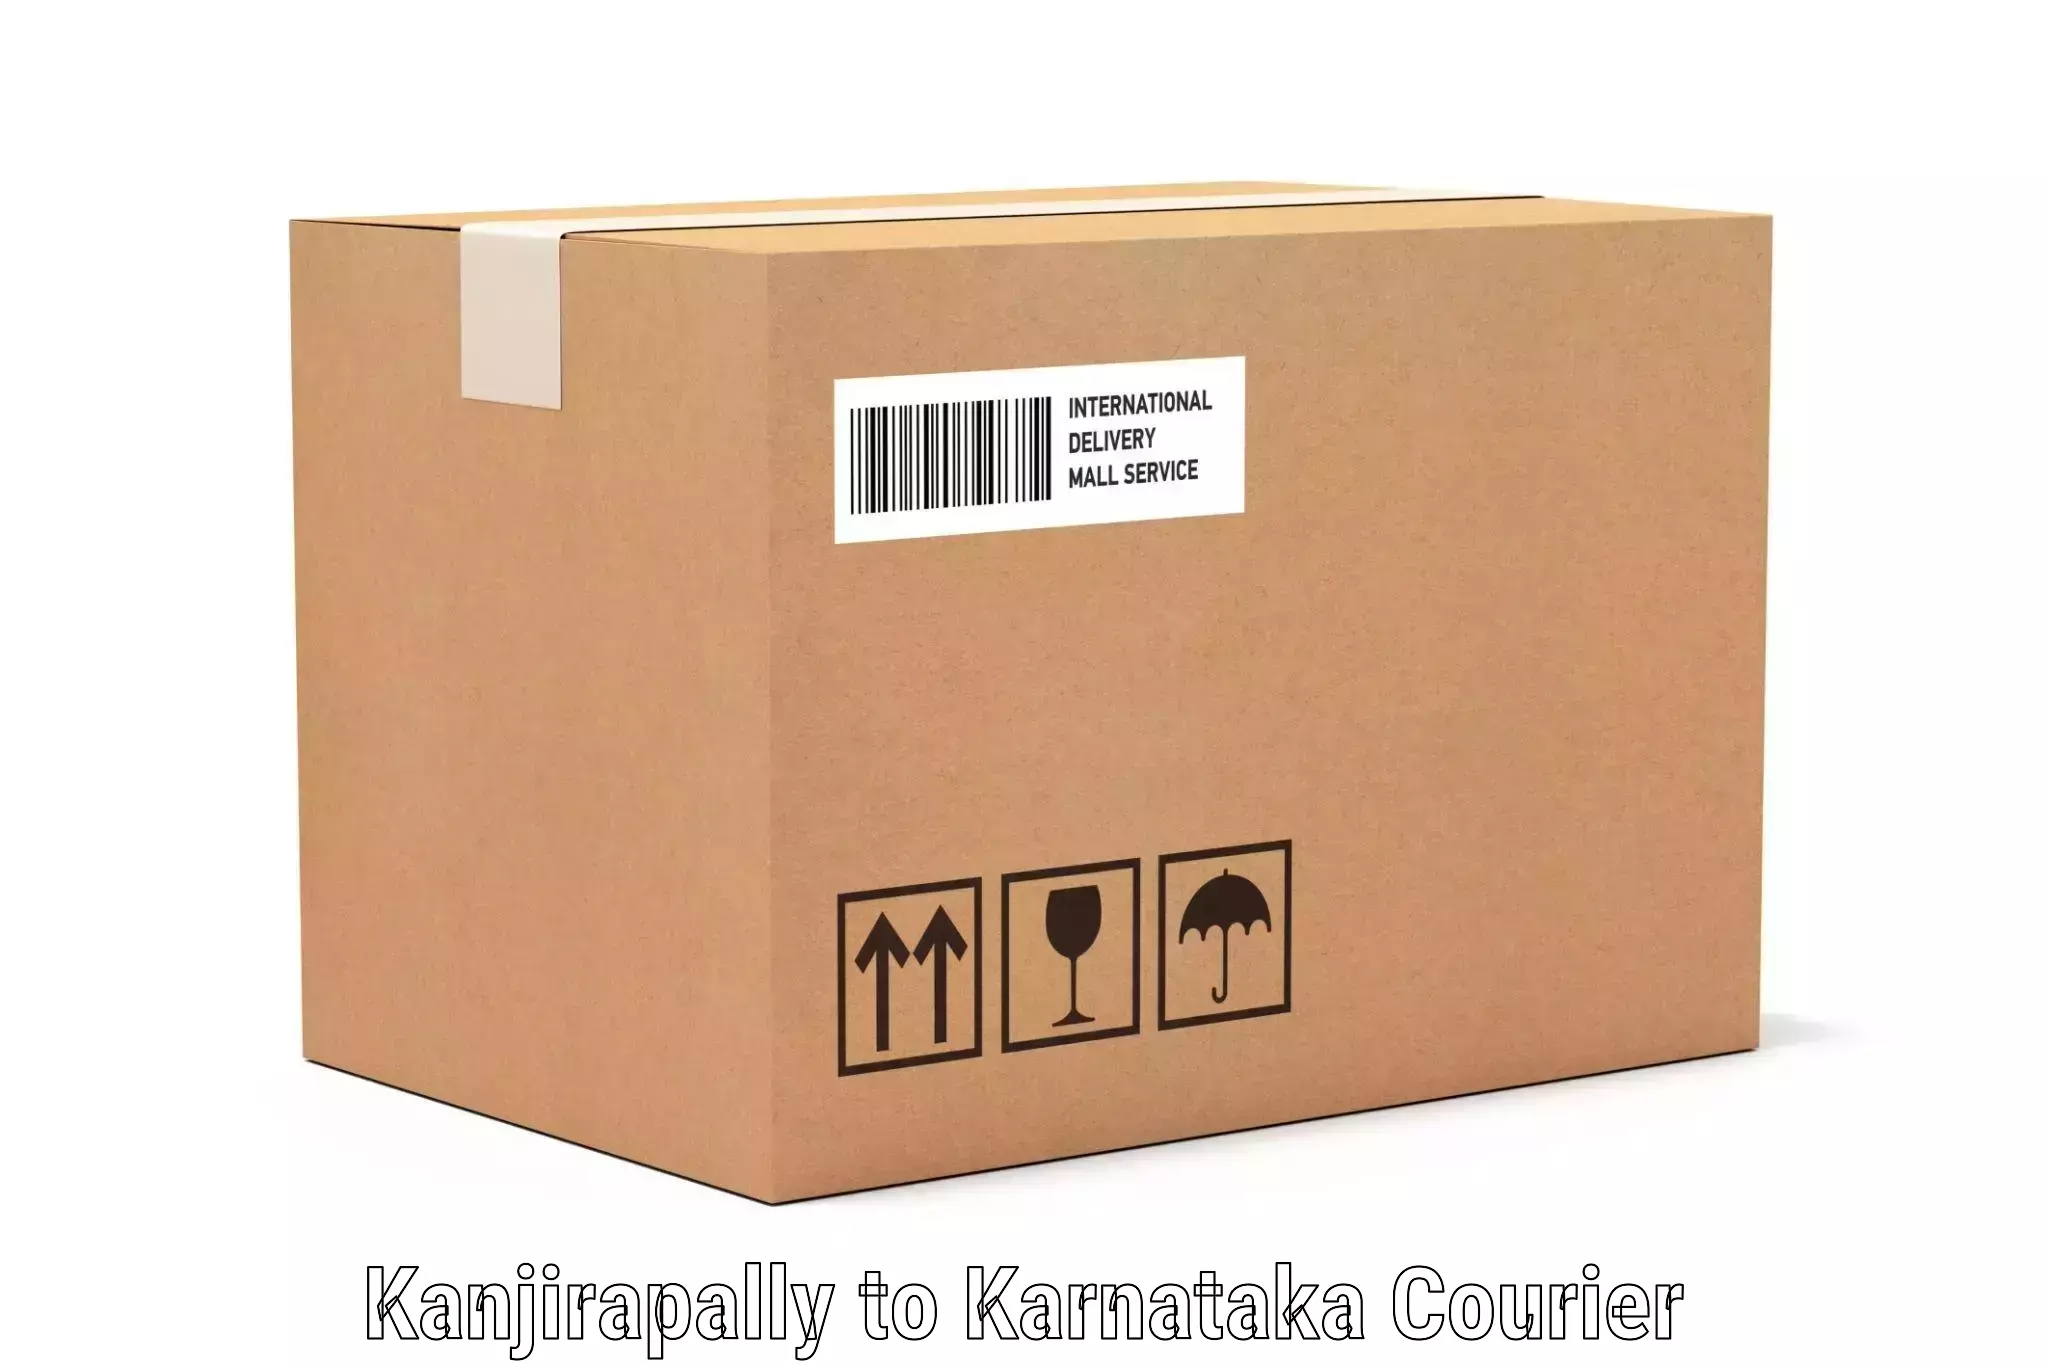 Luggage delivery system Kanjirapally to Bengaluru